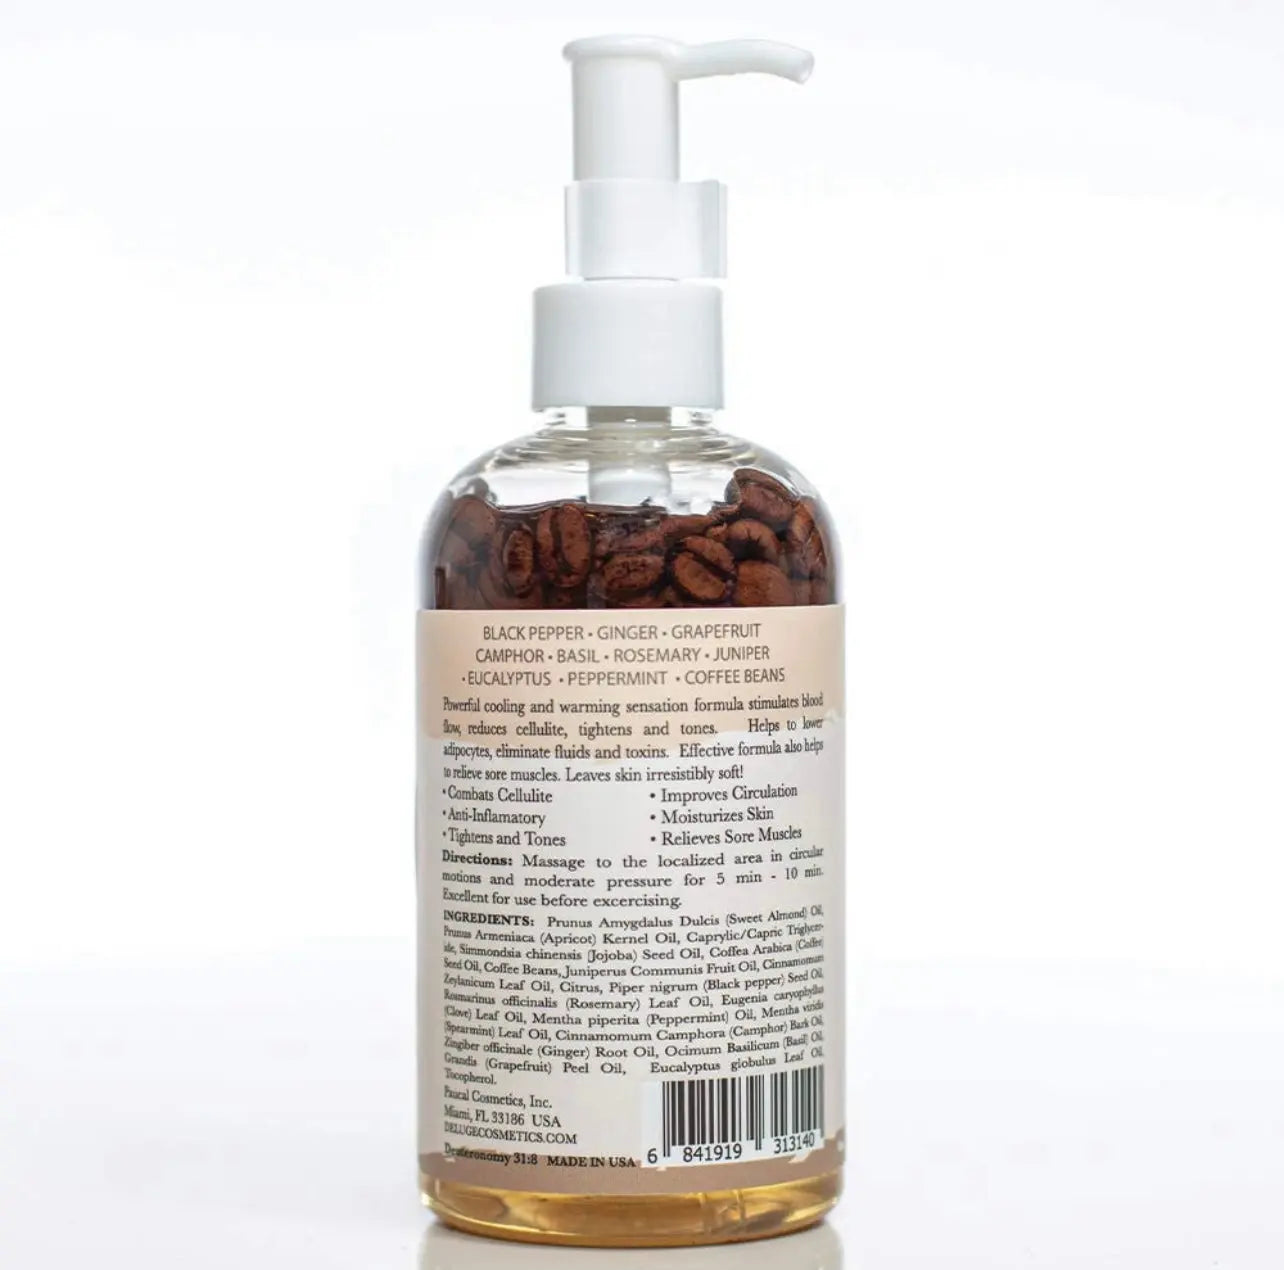 Deluge Original Massage Oil with coffee for Cellulite Treatment, Full Body Spa Relaxation Therapy and Sore Muscles.